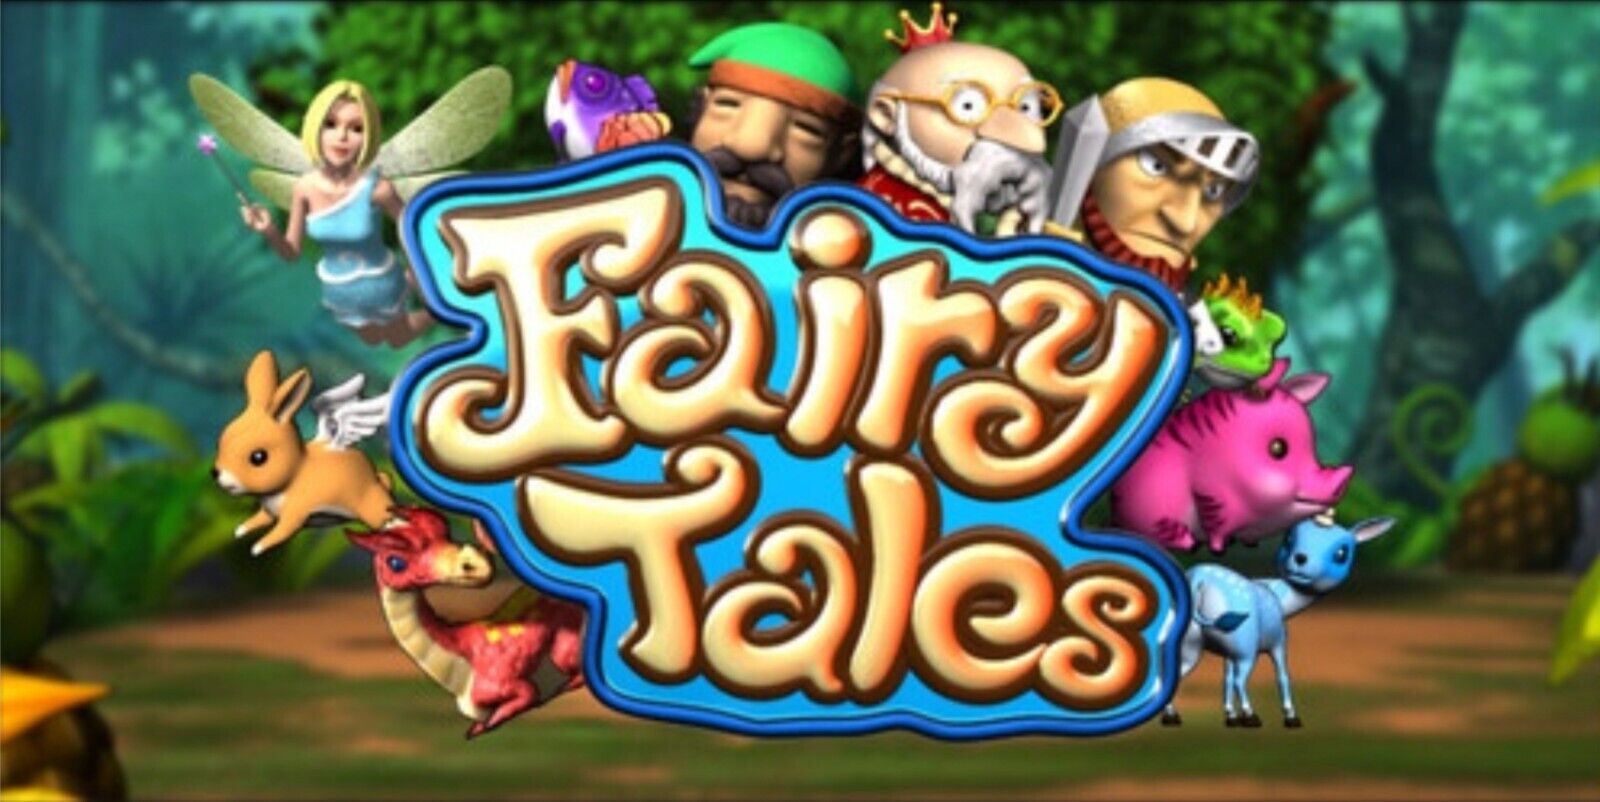 Fairy Tales Game By Astro - VGA 8 Liner